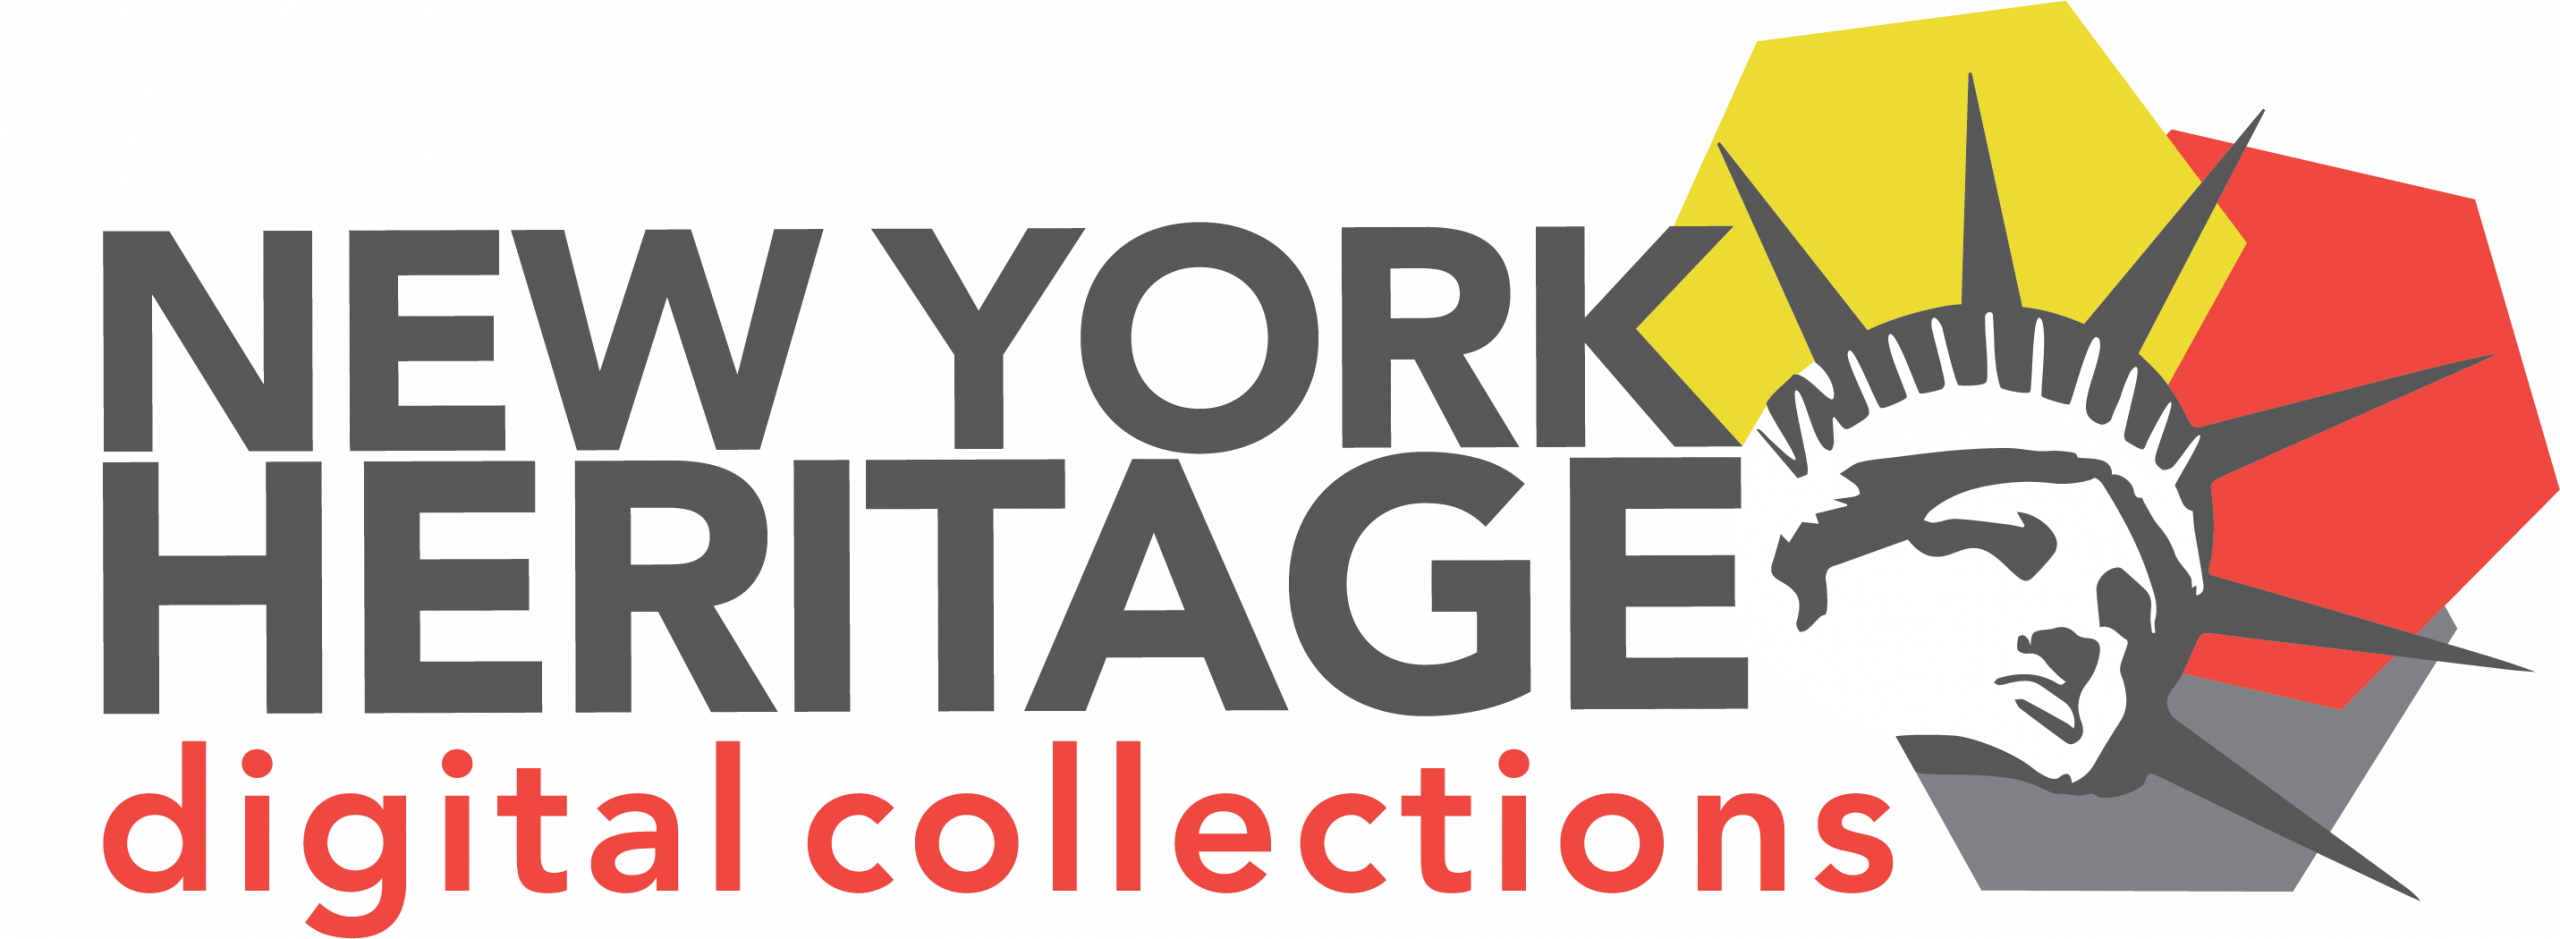 New York Heritage digital collections